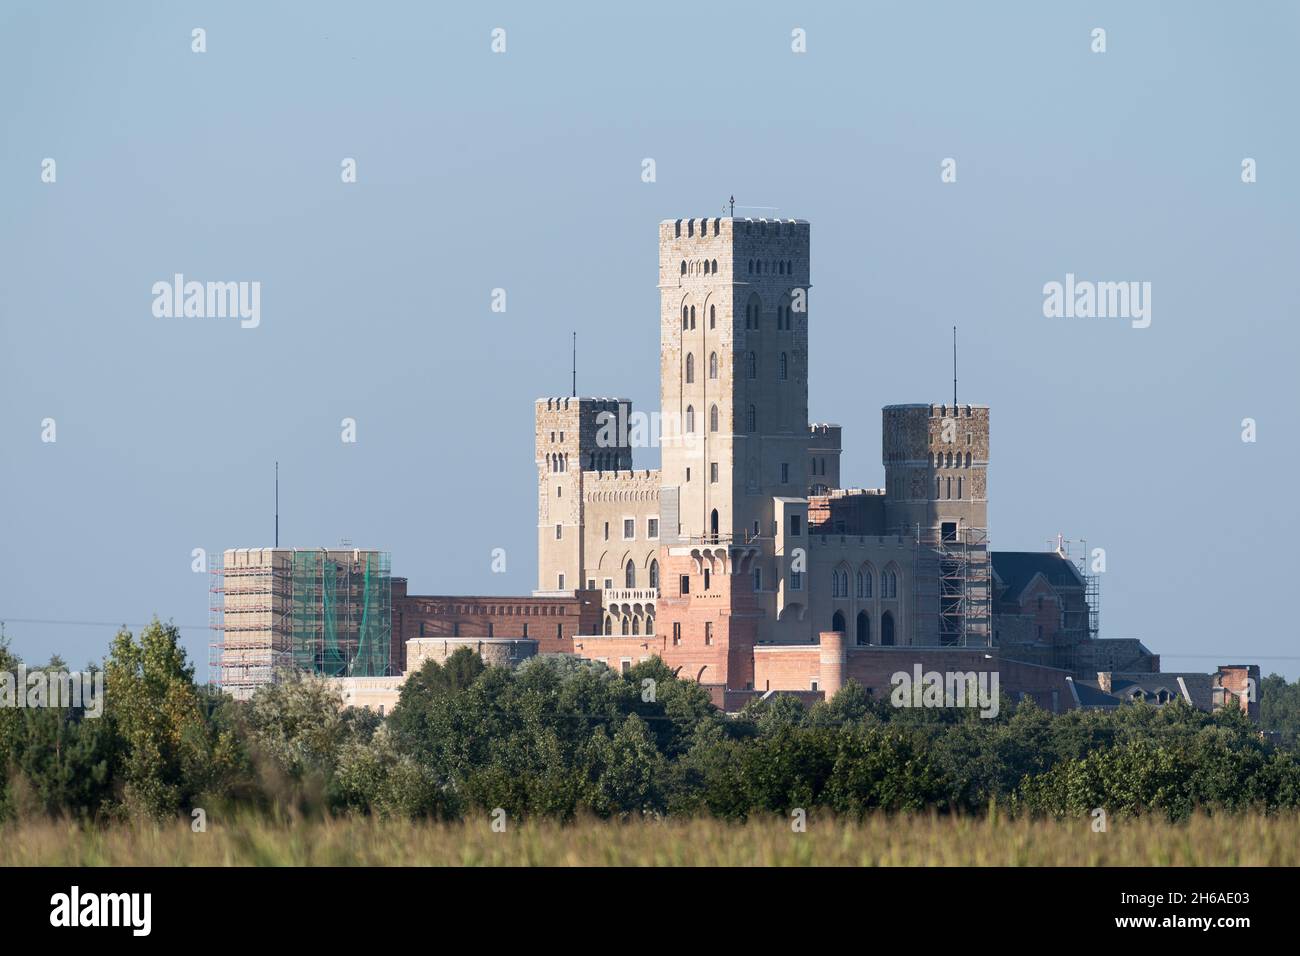 Construction site of multifunctional building castle in Stobnica, Poland. September 9th 2021 © Wojciech Strozyk / Alamy Stock Photo Stock Photo